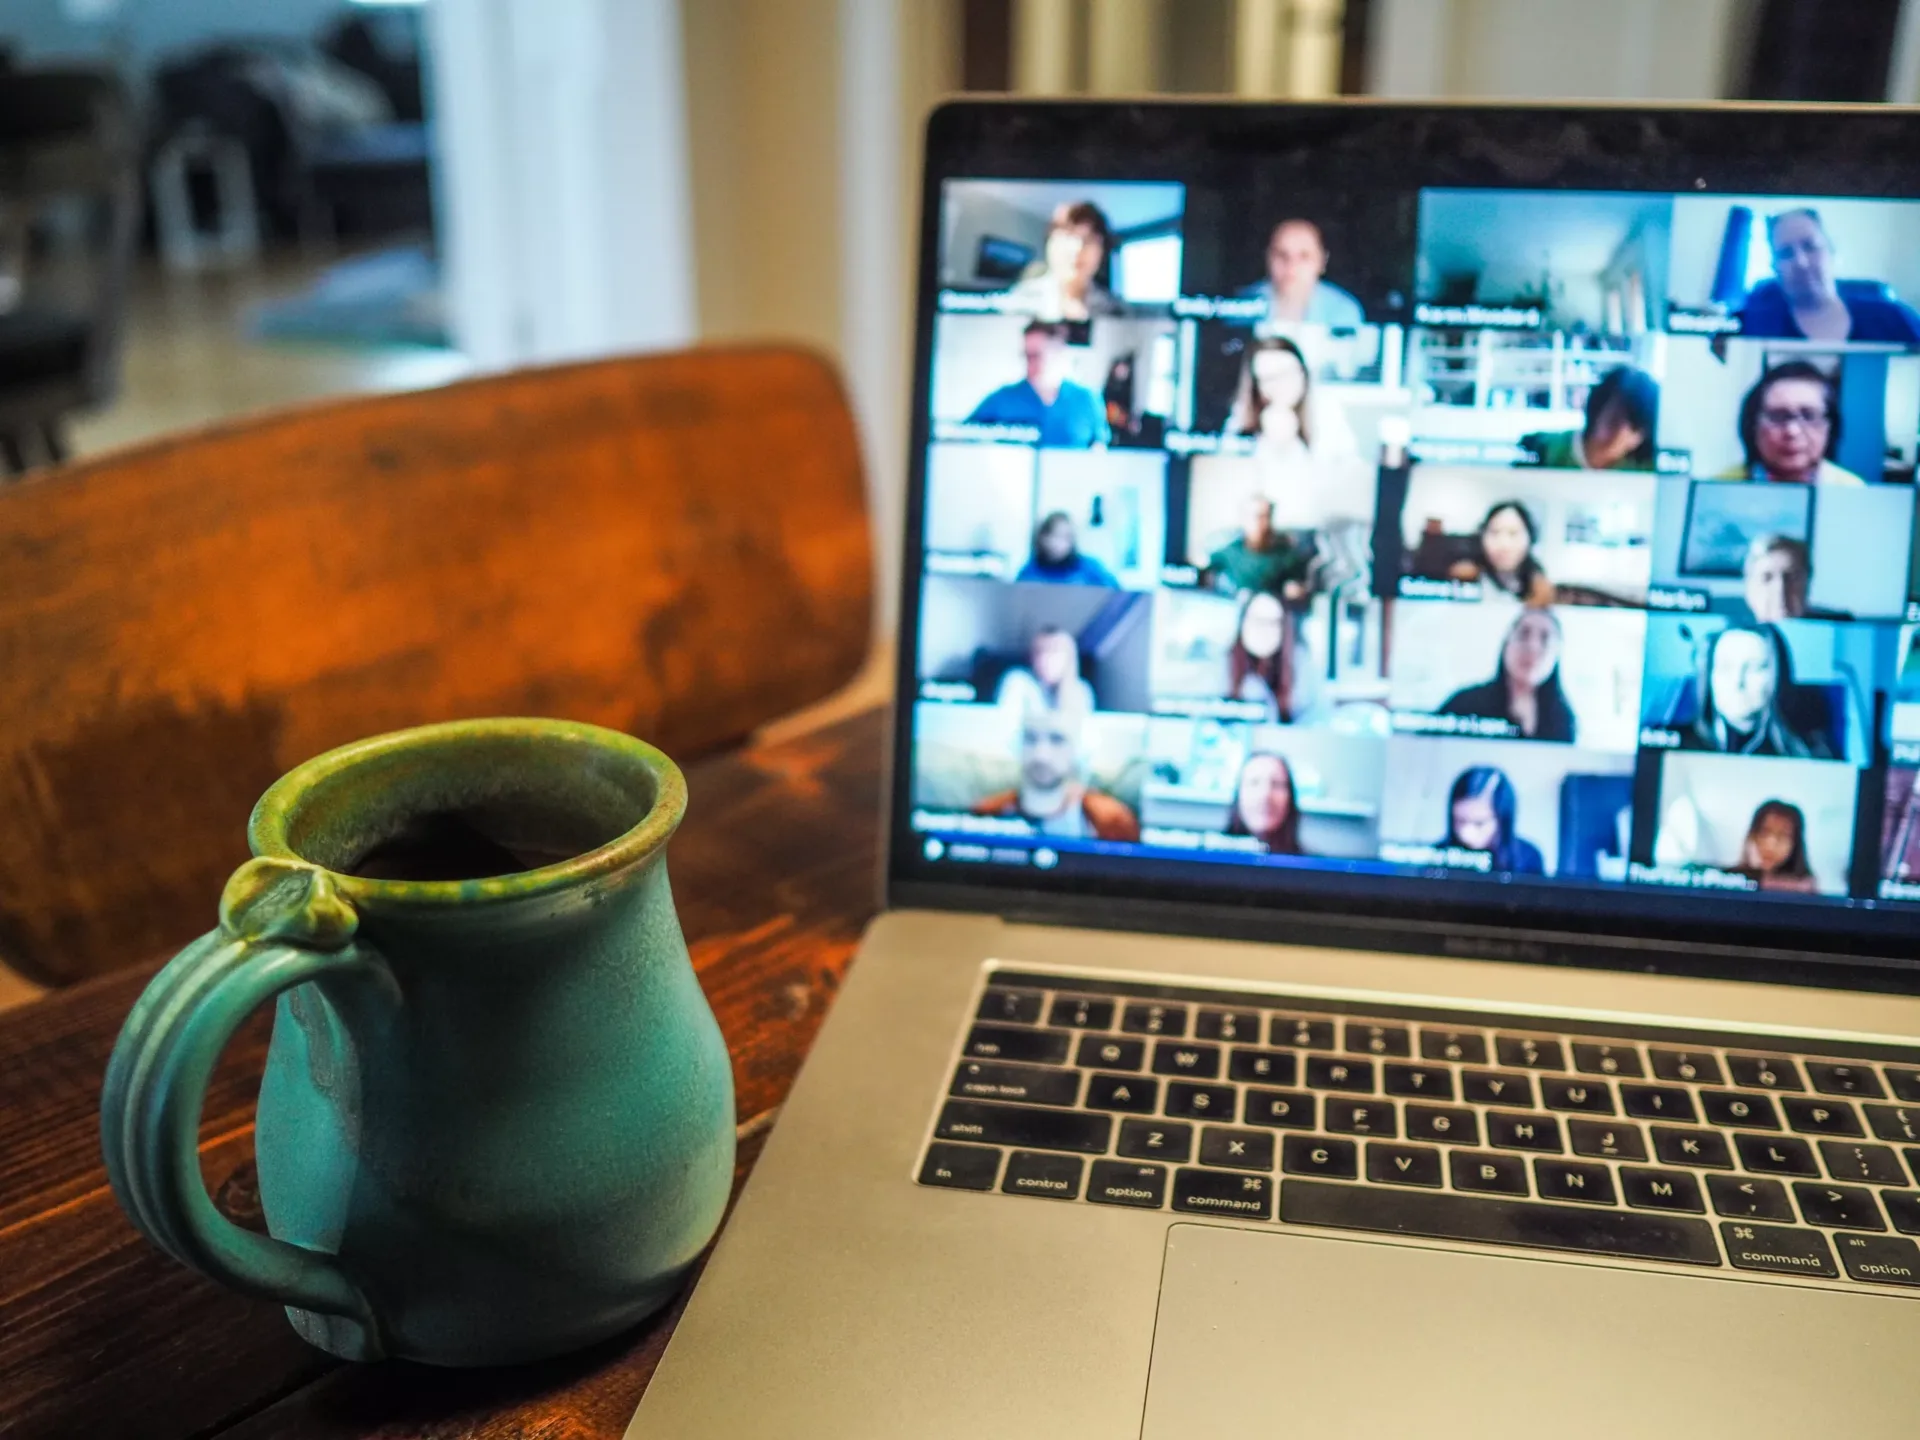 The Office vs Remote Working Debate Rumbles On, But What Should Companies Do Next?